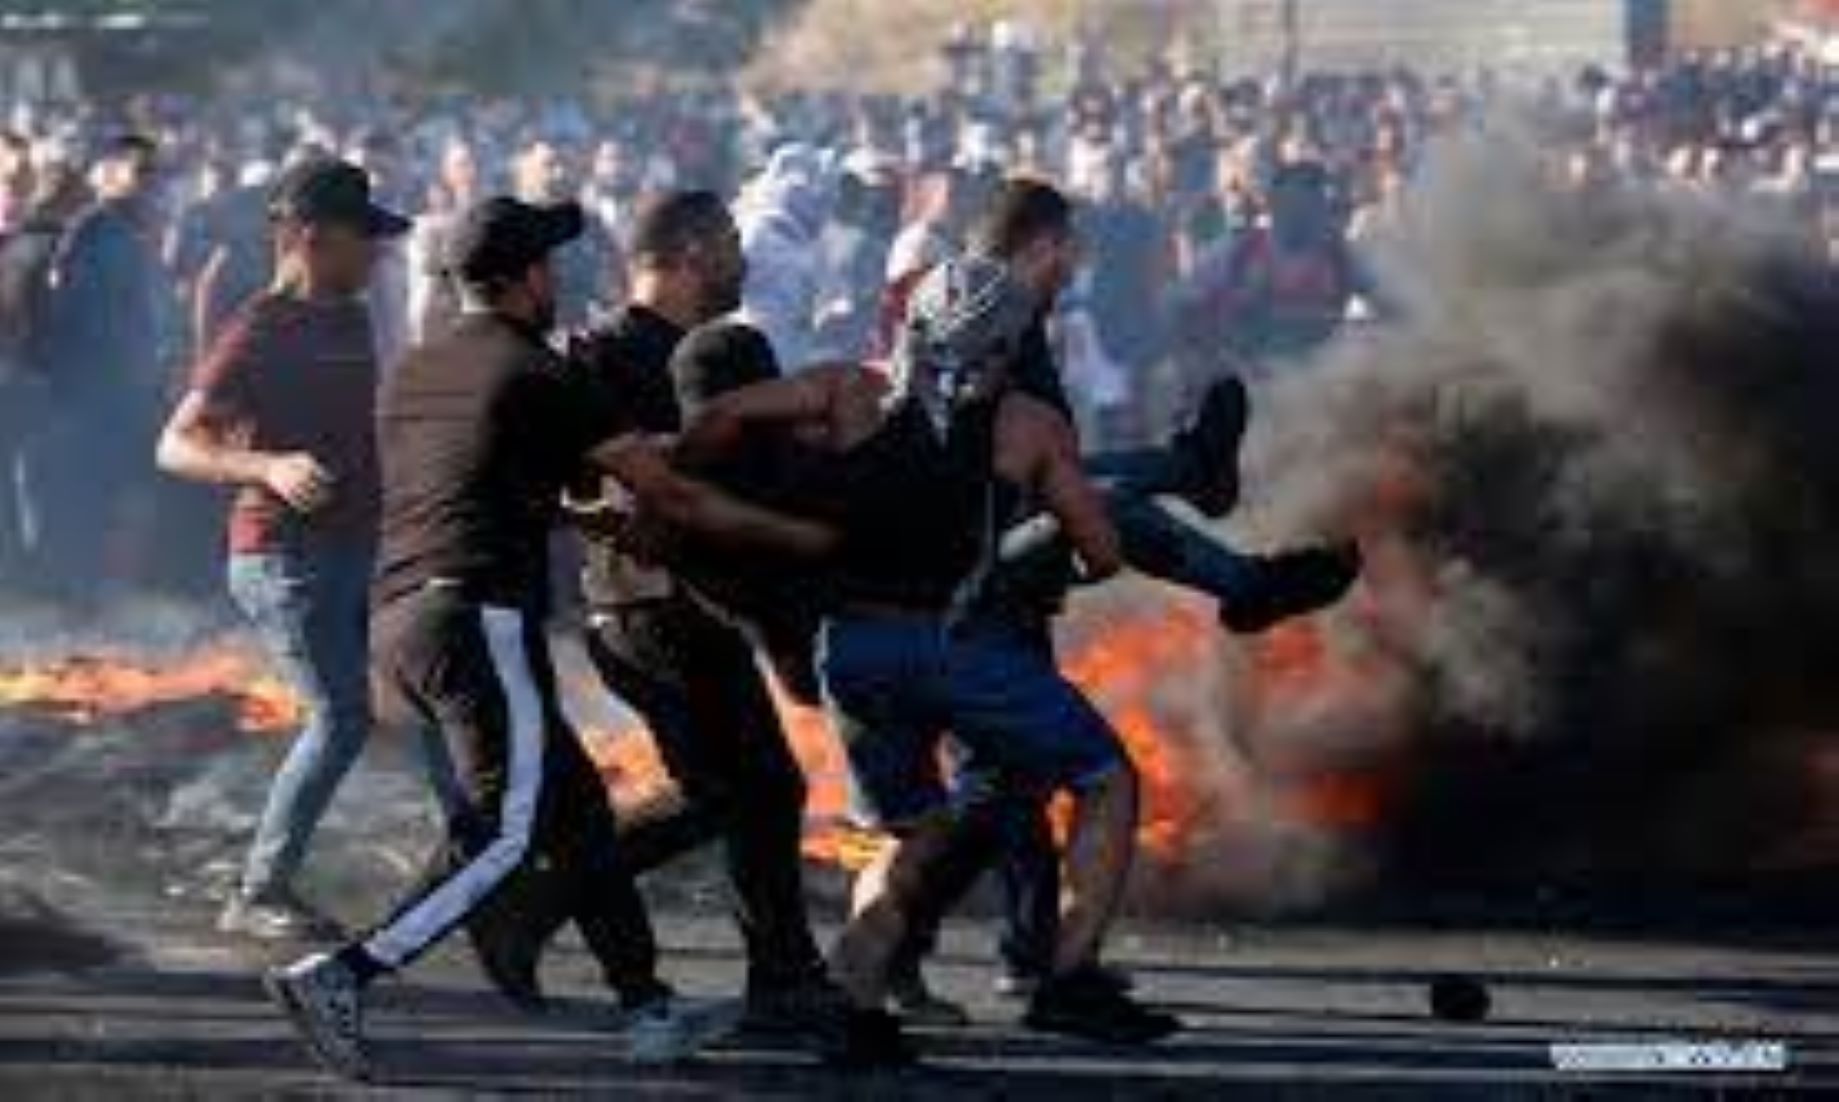 Four More Palestinians Killed In Clashes With Israeli Soldiers In West Bank